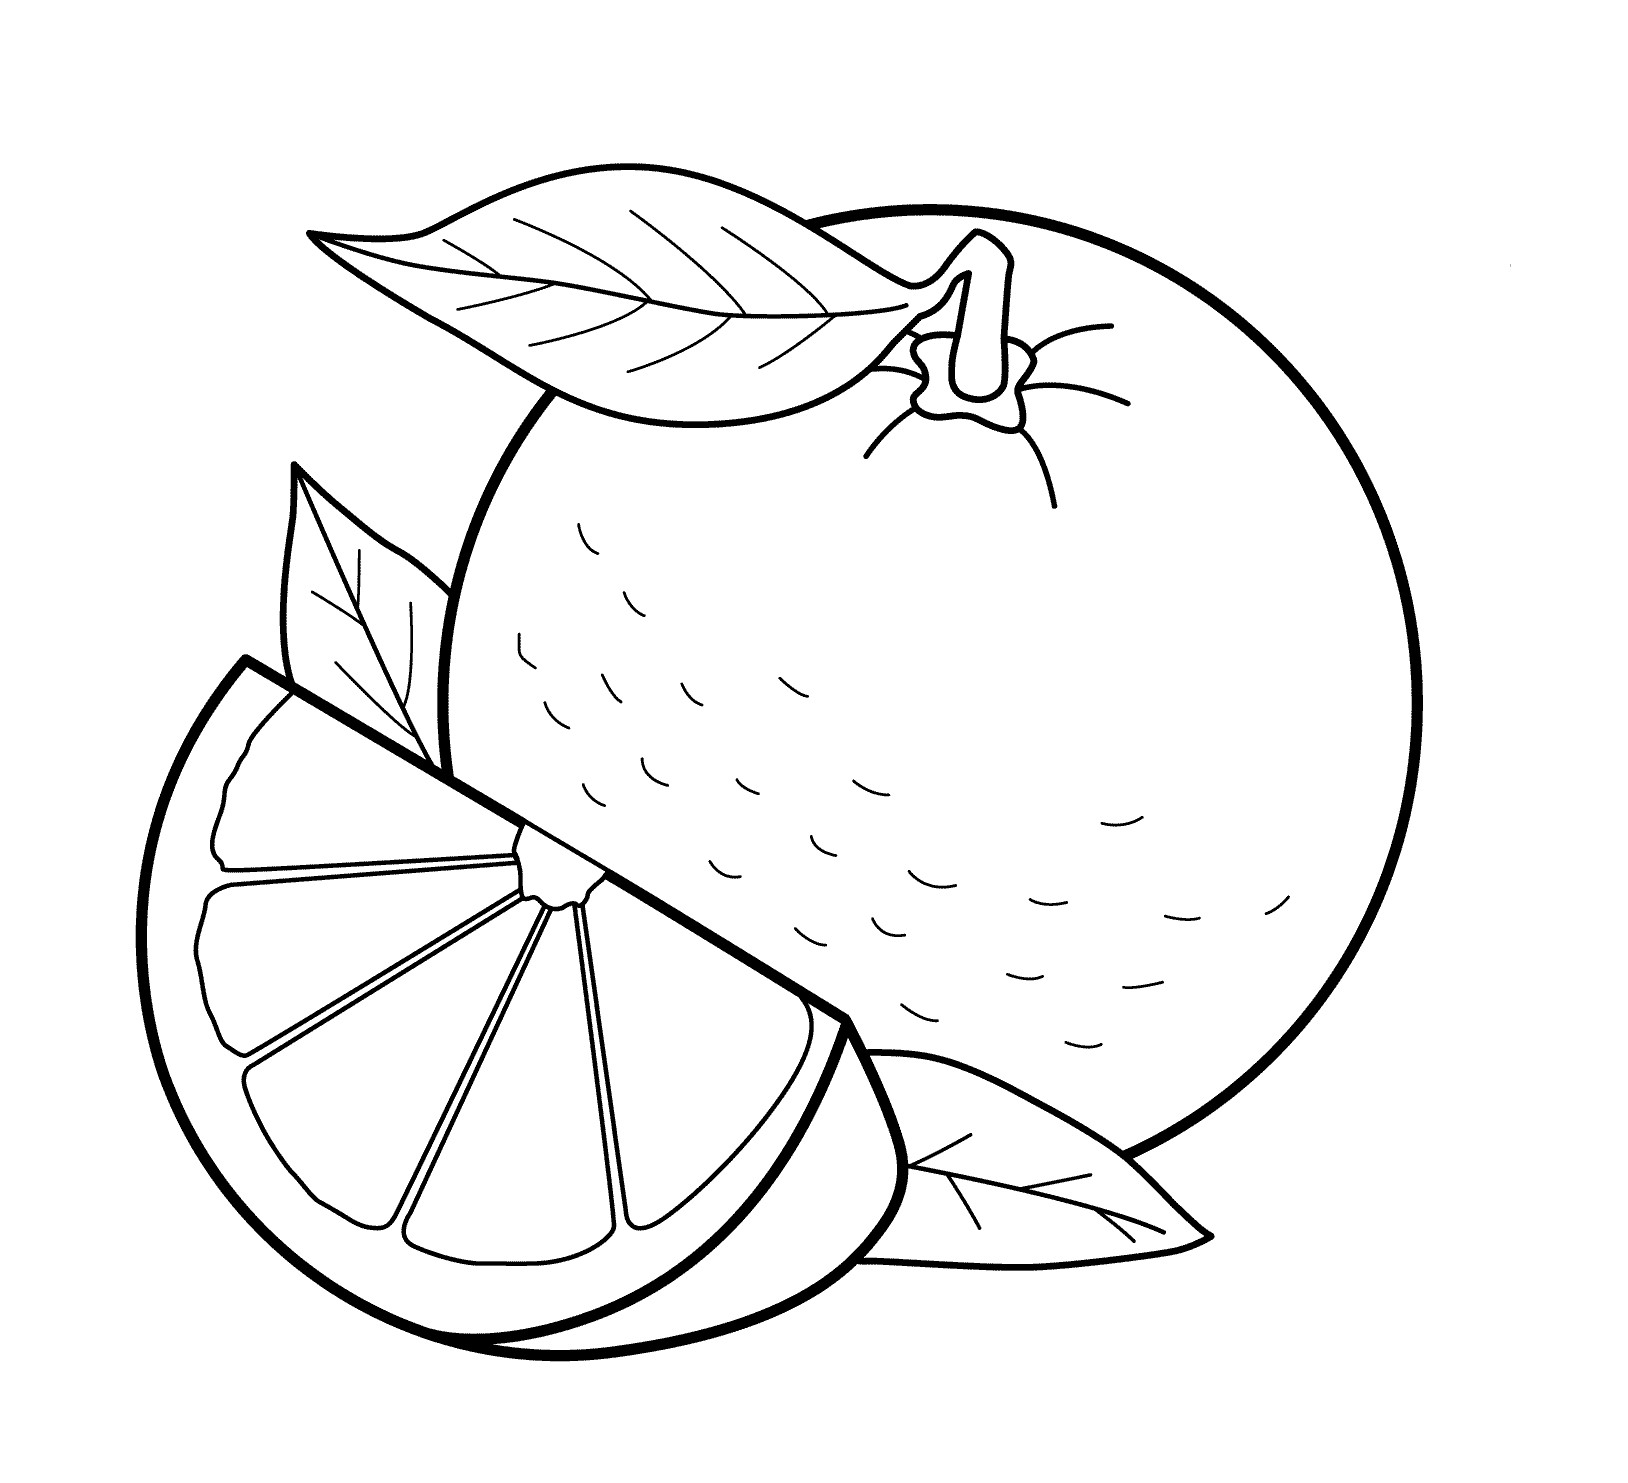 Fruit Coloring Pages For Toddlers
 Free Printable Fruit Coloring Pages For Kids